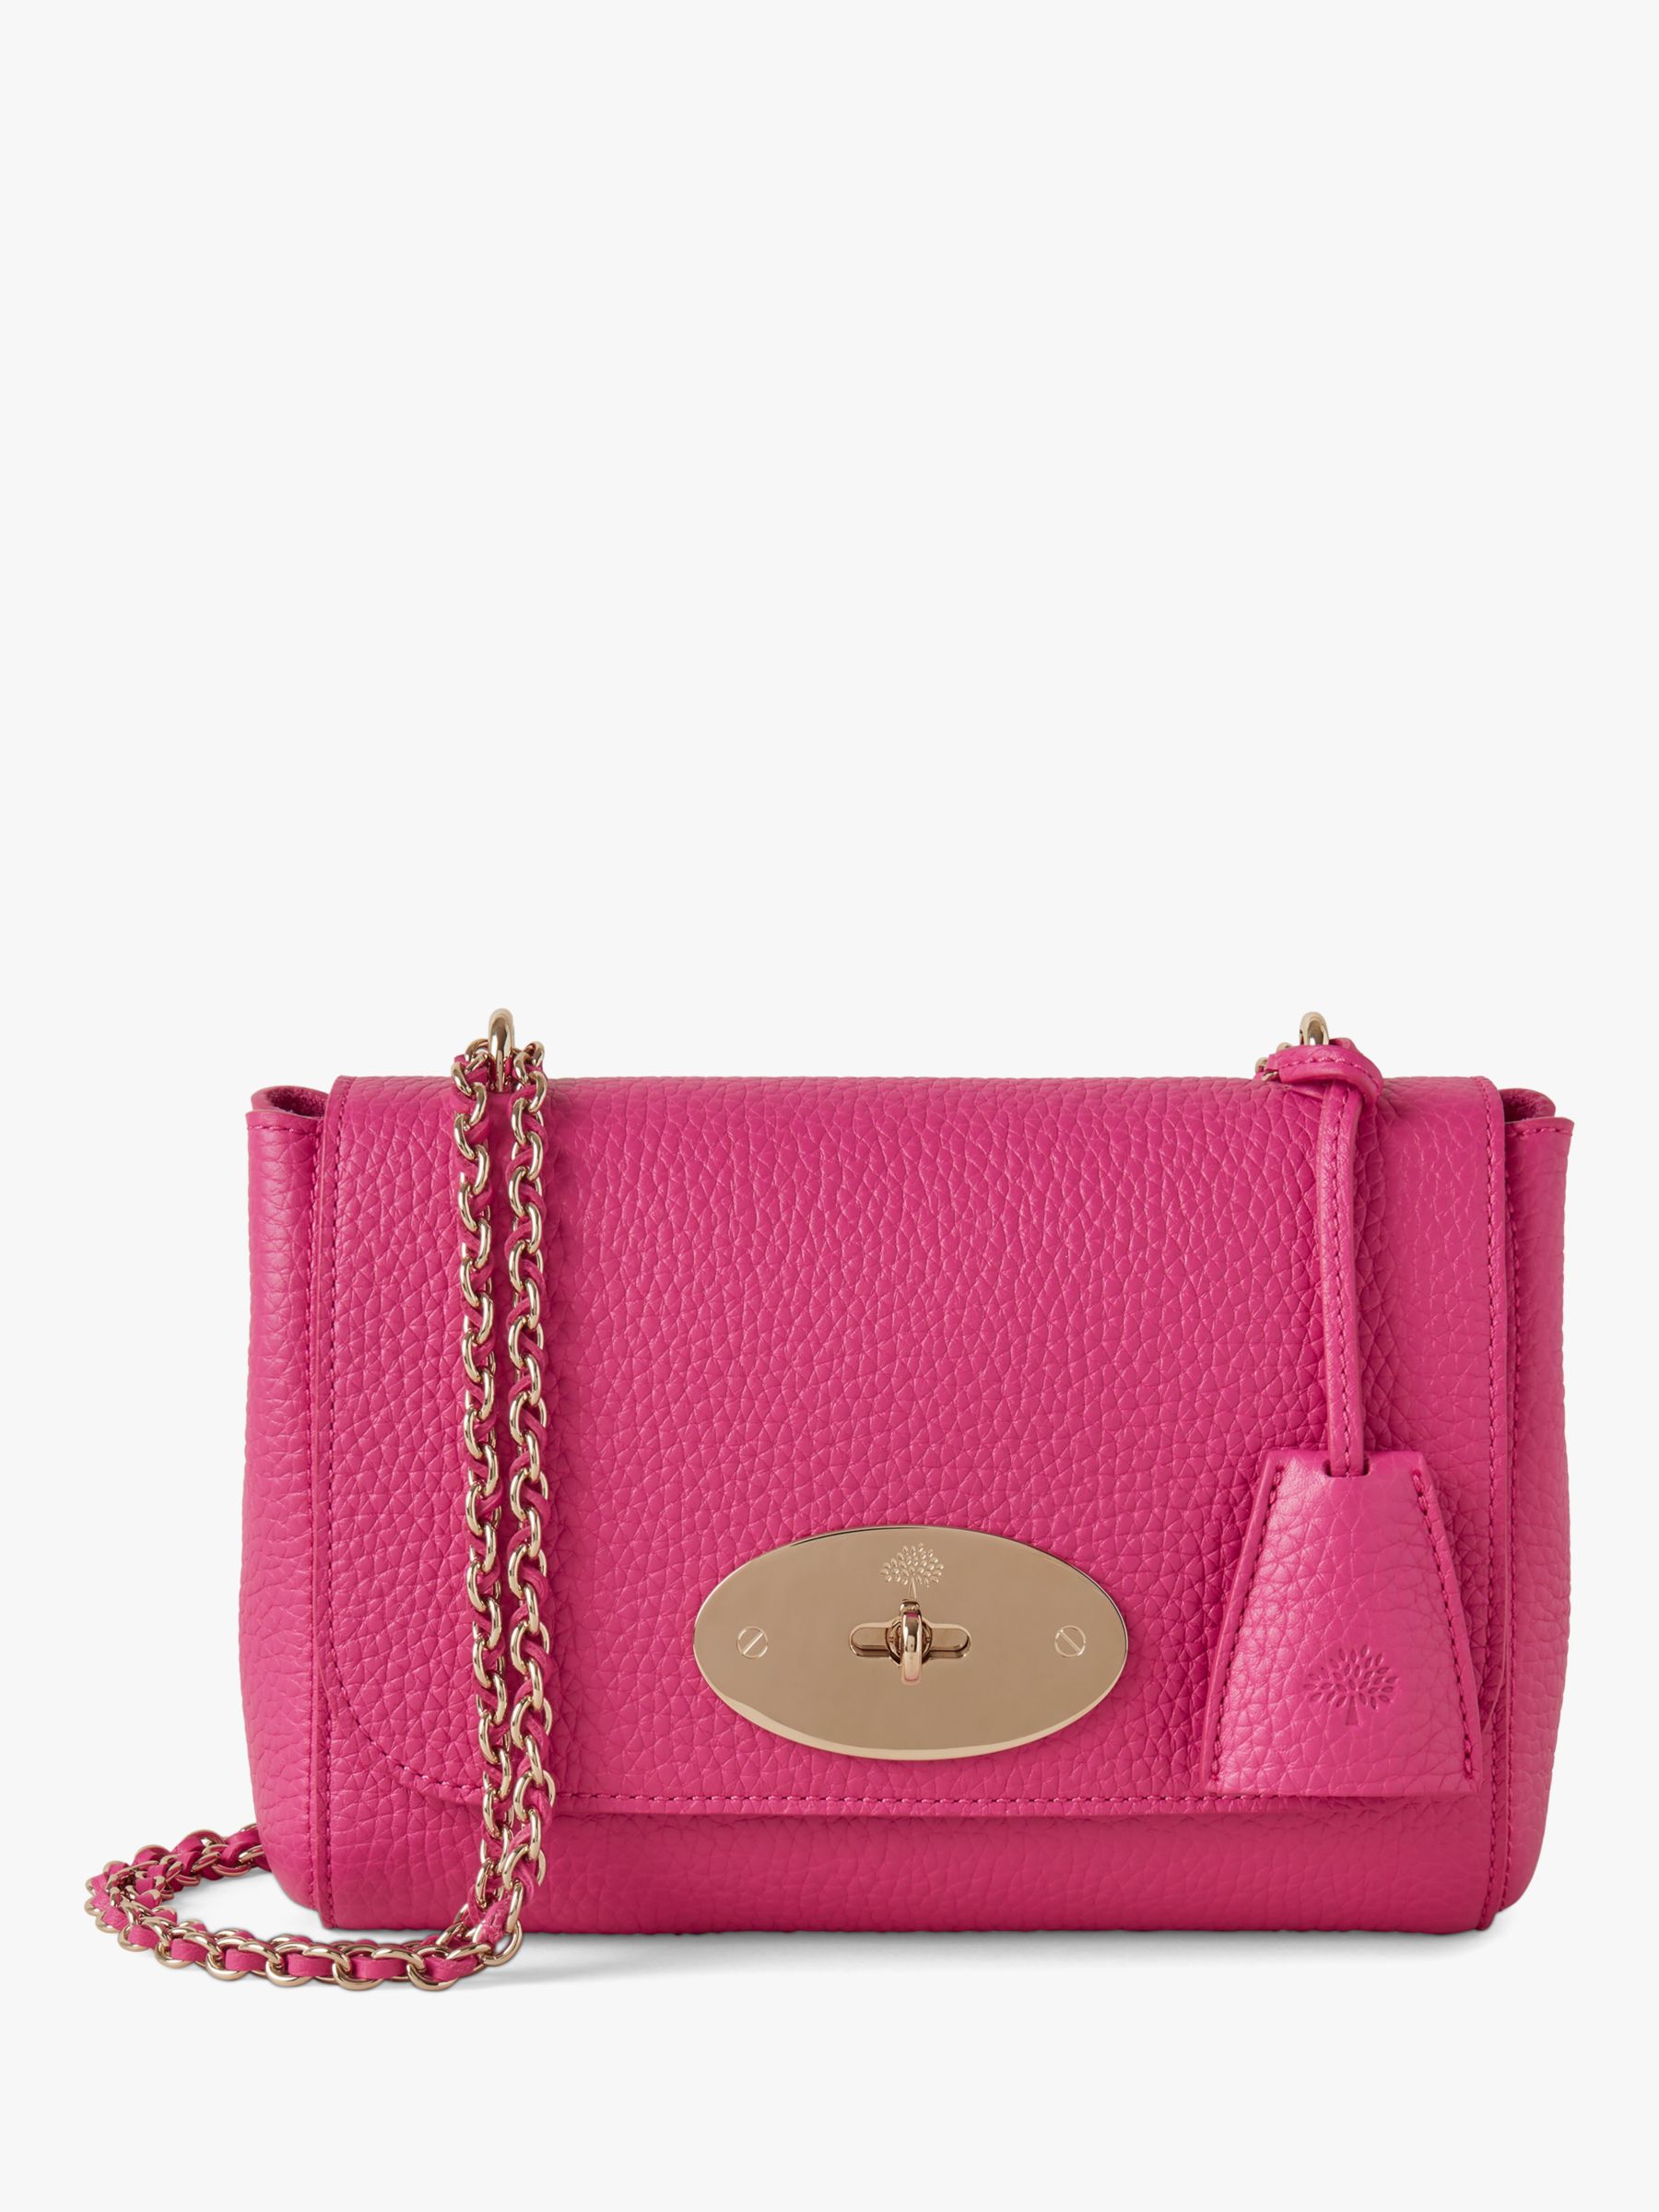 Mulberry Lily Heavy Grain Leather Shoulder Bag, Mulberry Pink